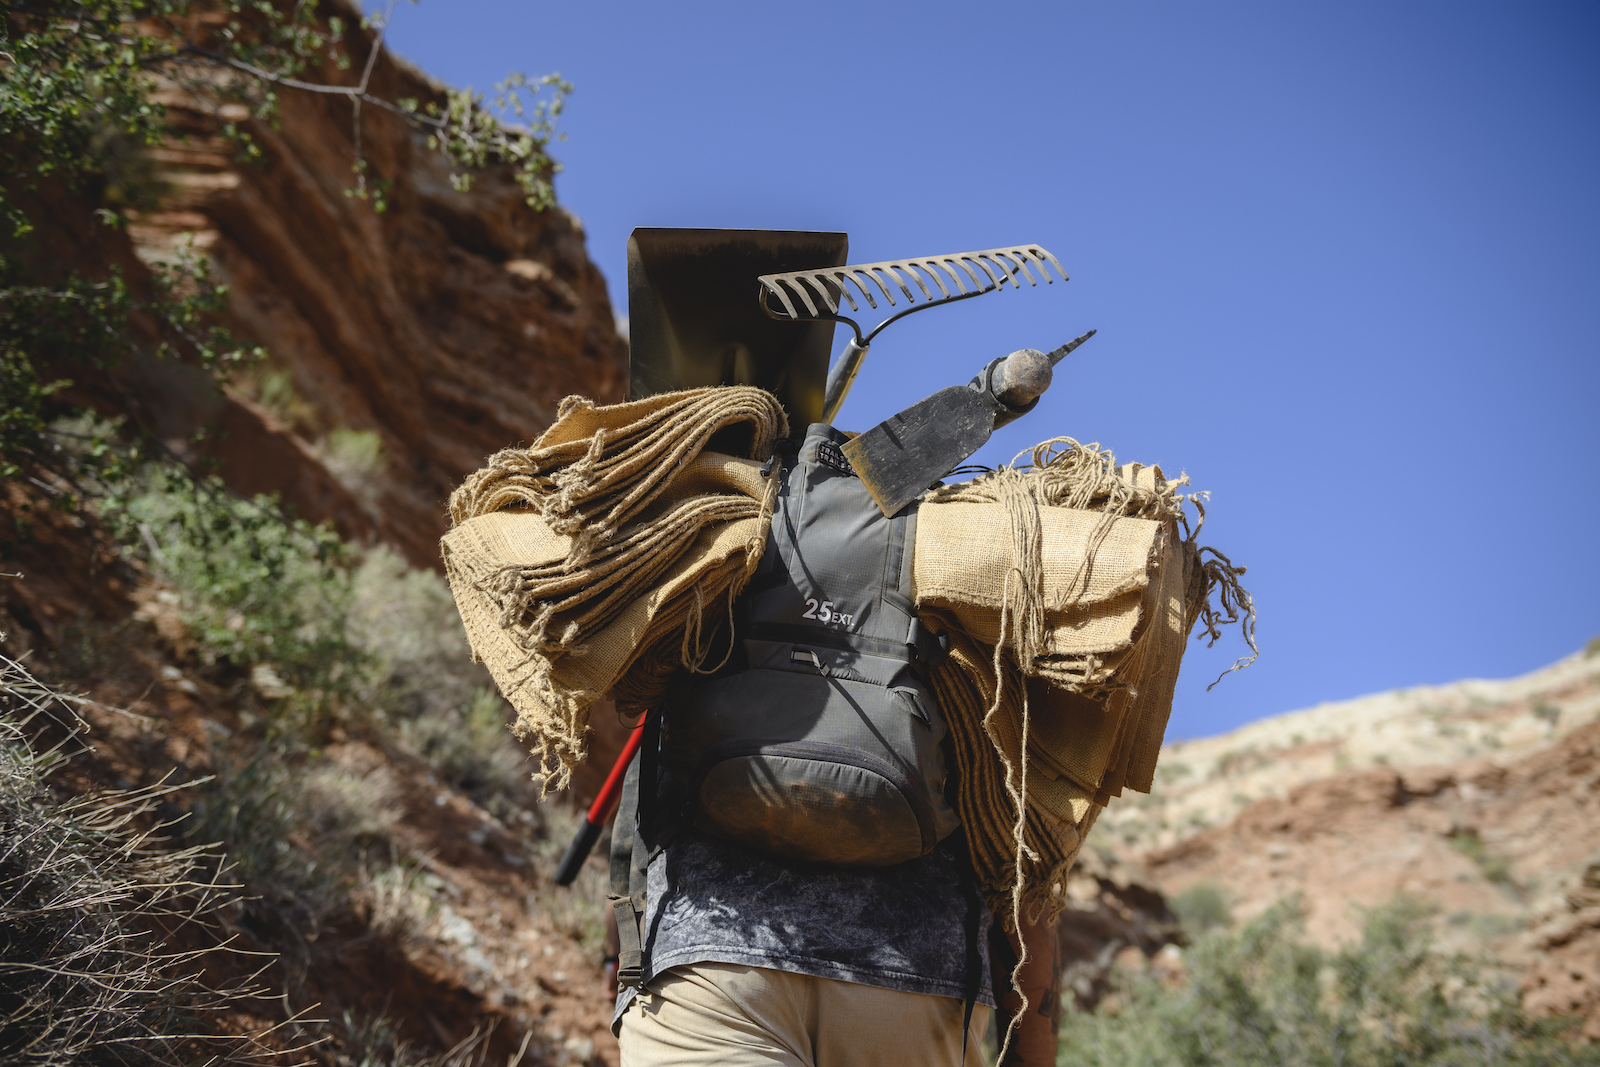 Sandbags and tools are carried uphill at Red Bull Formation in Virgin, Utah, USA on 09 May, 2022